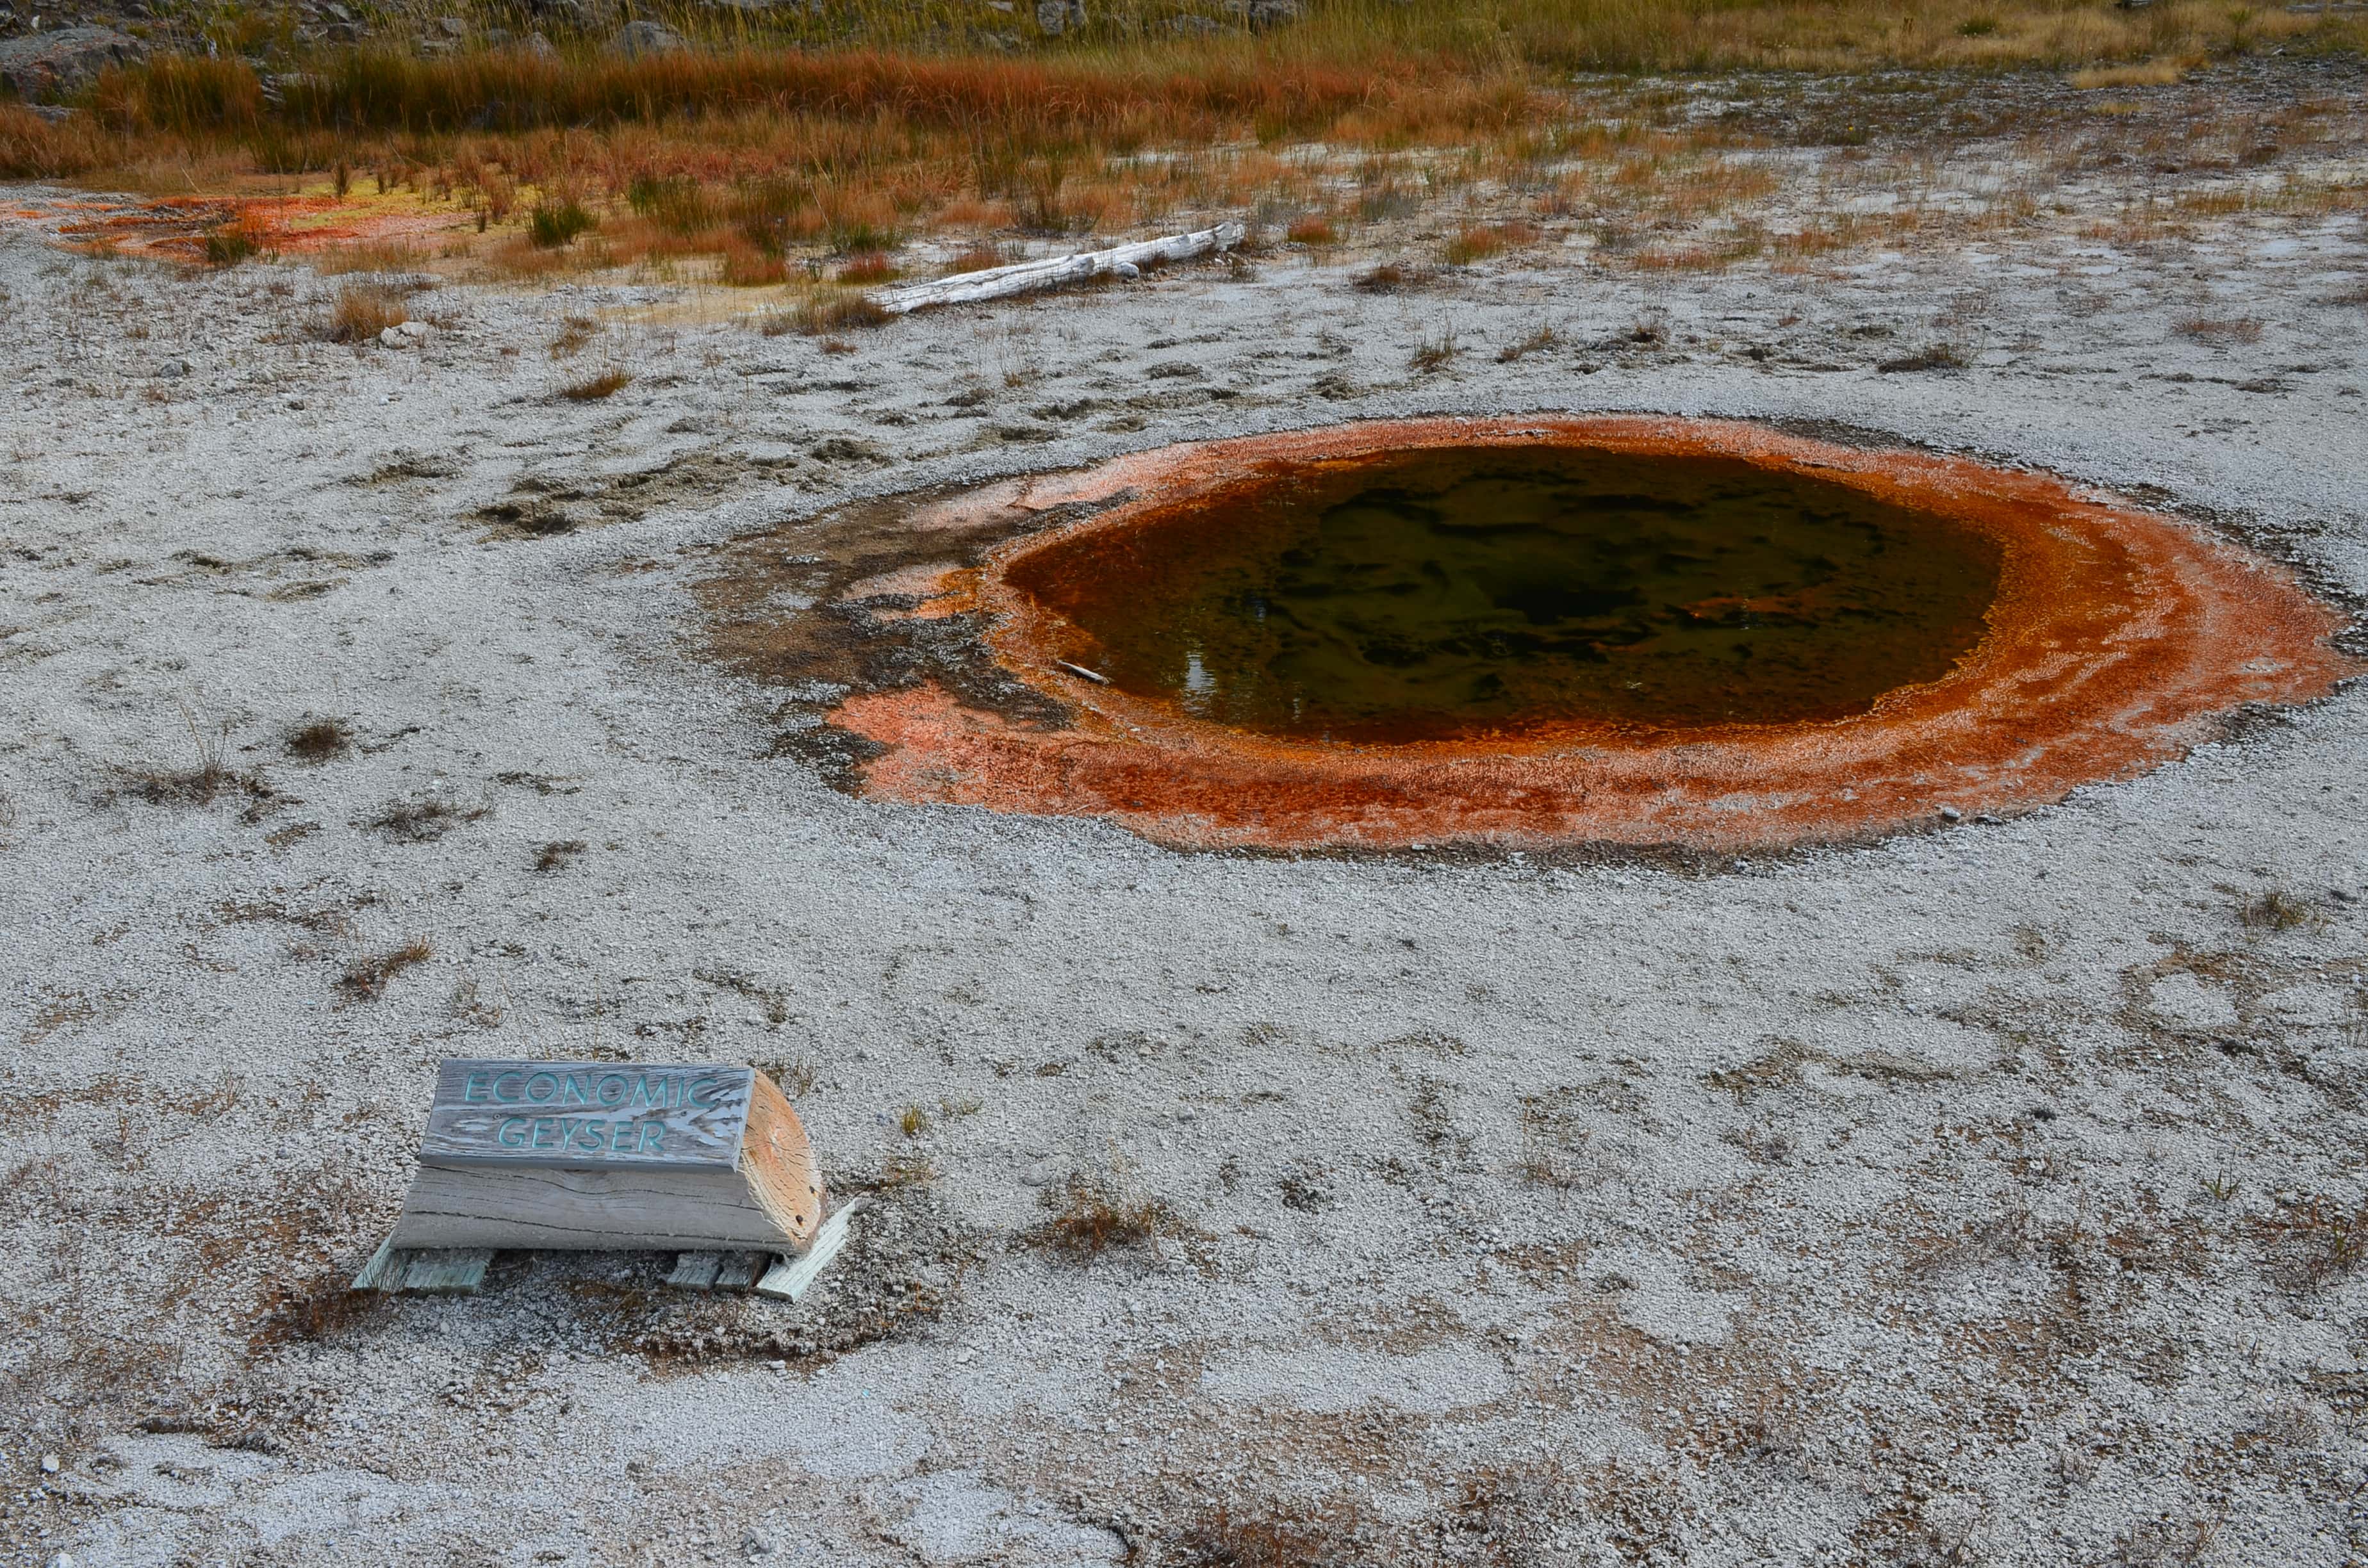 Economic Geyser at the Upper Geyser Basin in Yellowstone National Park, Wyoming